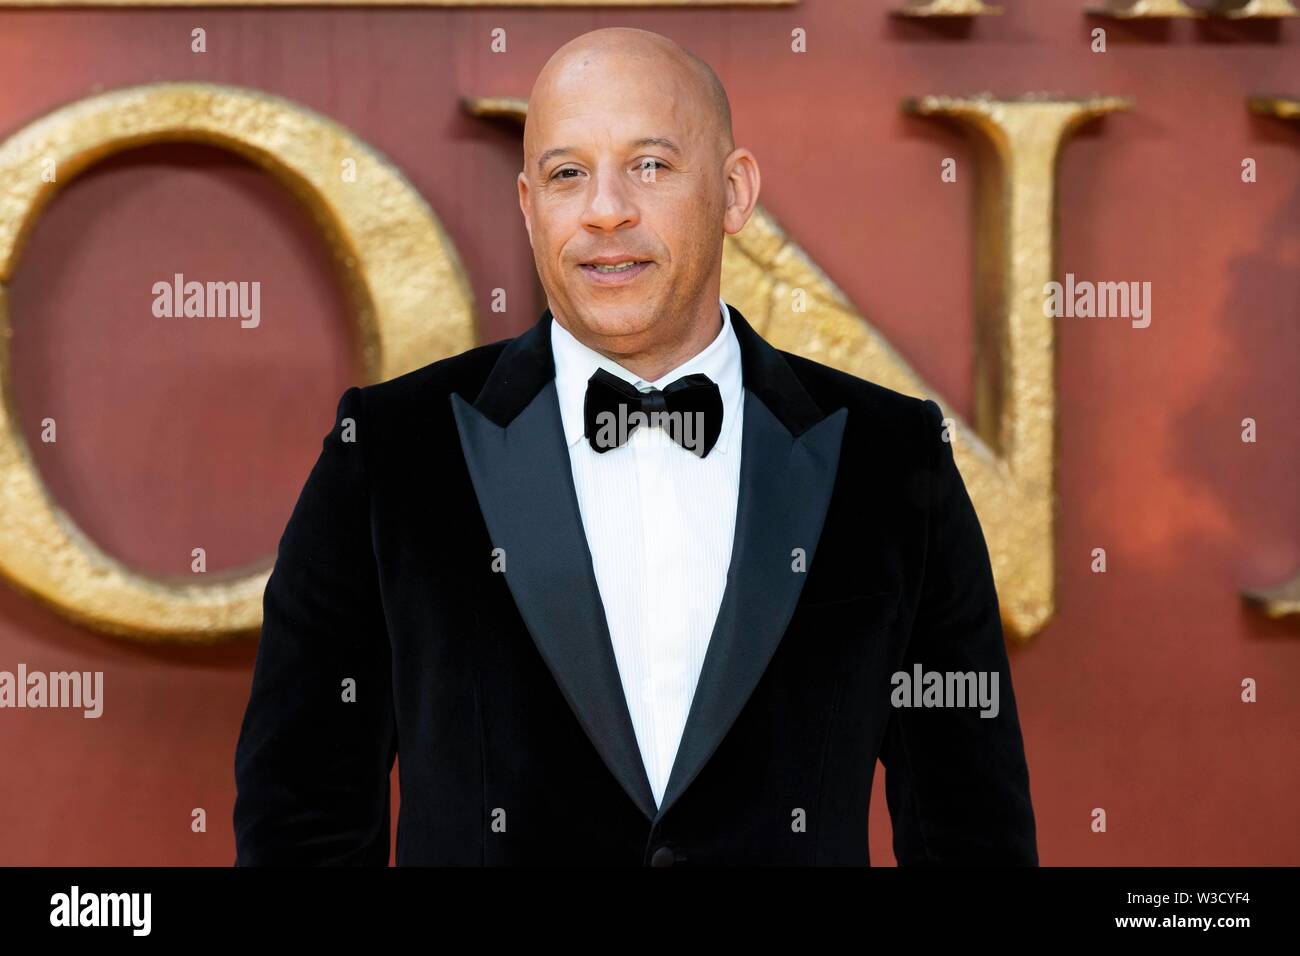 London, UK. 14th July 2019. Vin Diesel attends THE KING LION European Premiere at Leicester Square. London, UK. 14/07/2019 | usage worldwide Credit: dpa picture alliance/Alamy Live News Stock Photo